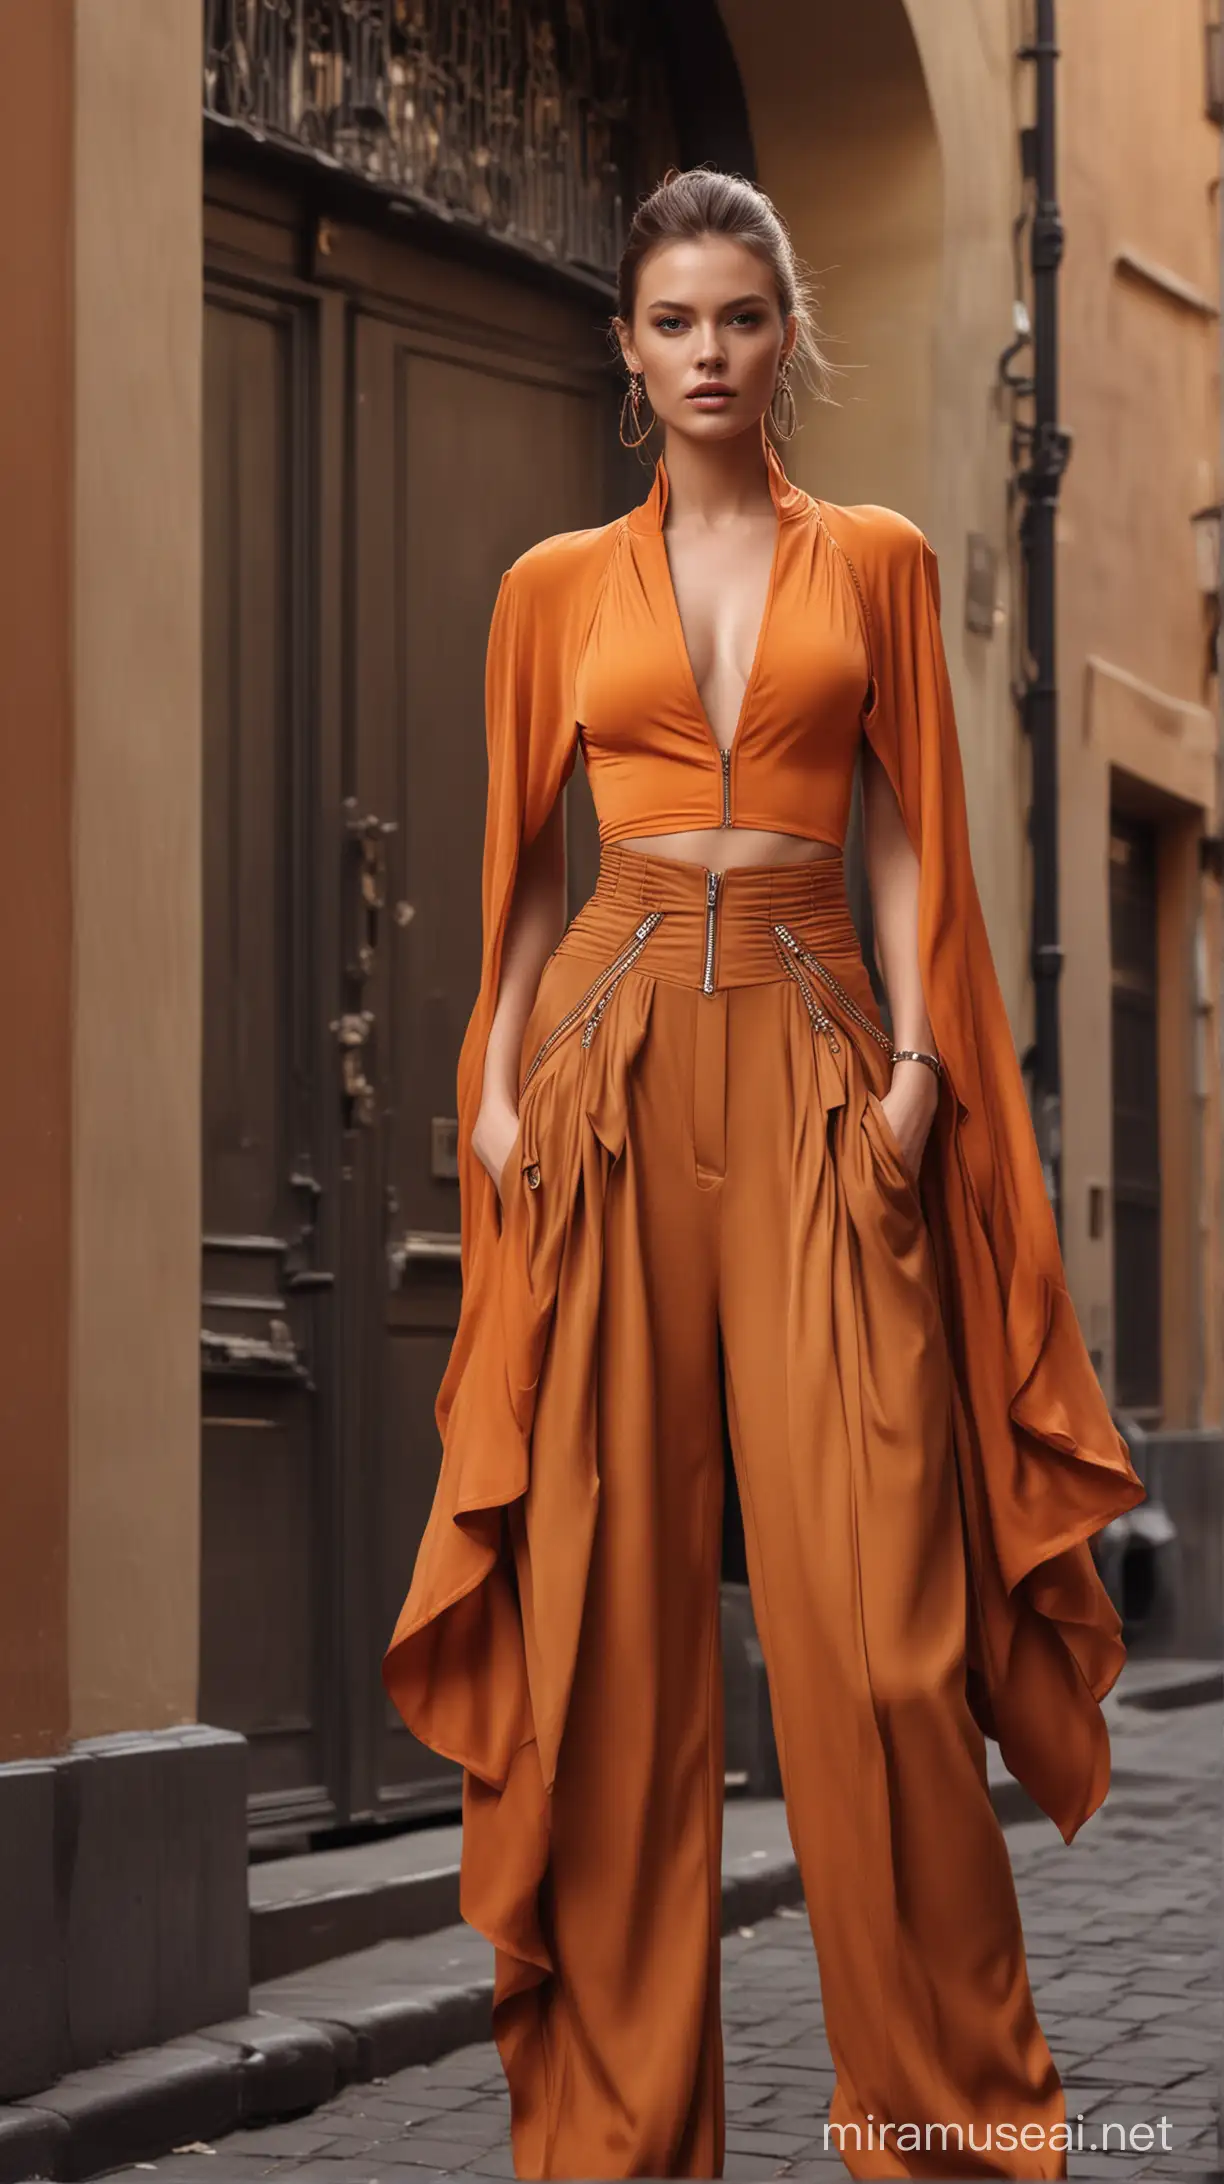 Stunning beautiful supermodel, street motion, front angle, wearing a zipper top, deep neckline, with large silk sleeves gathered at the elbow, and long washed silk pants with layered effect, hands in the pockets, statement jewelry, orange and brown , glam, hyper-realistic, Alexander McQueen style